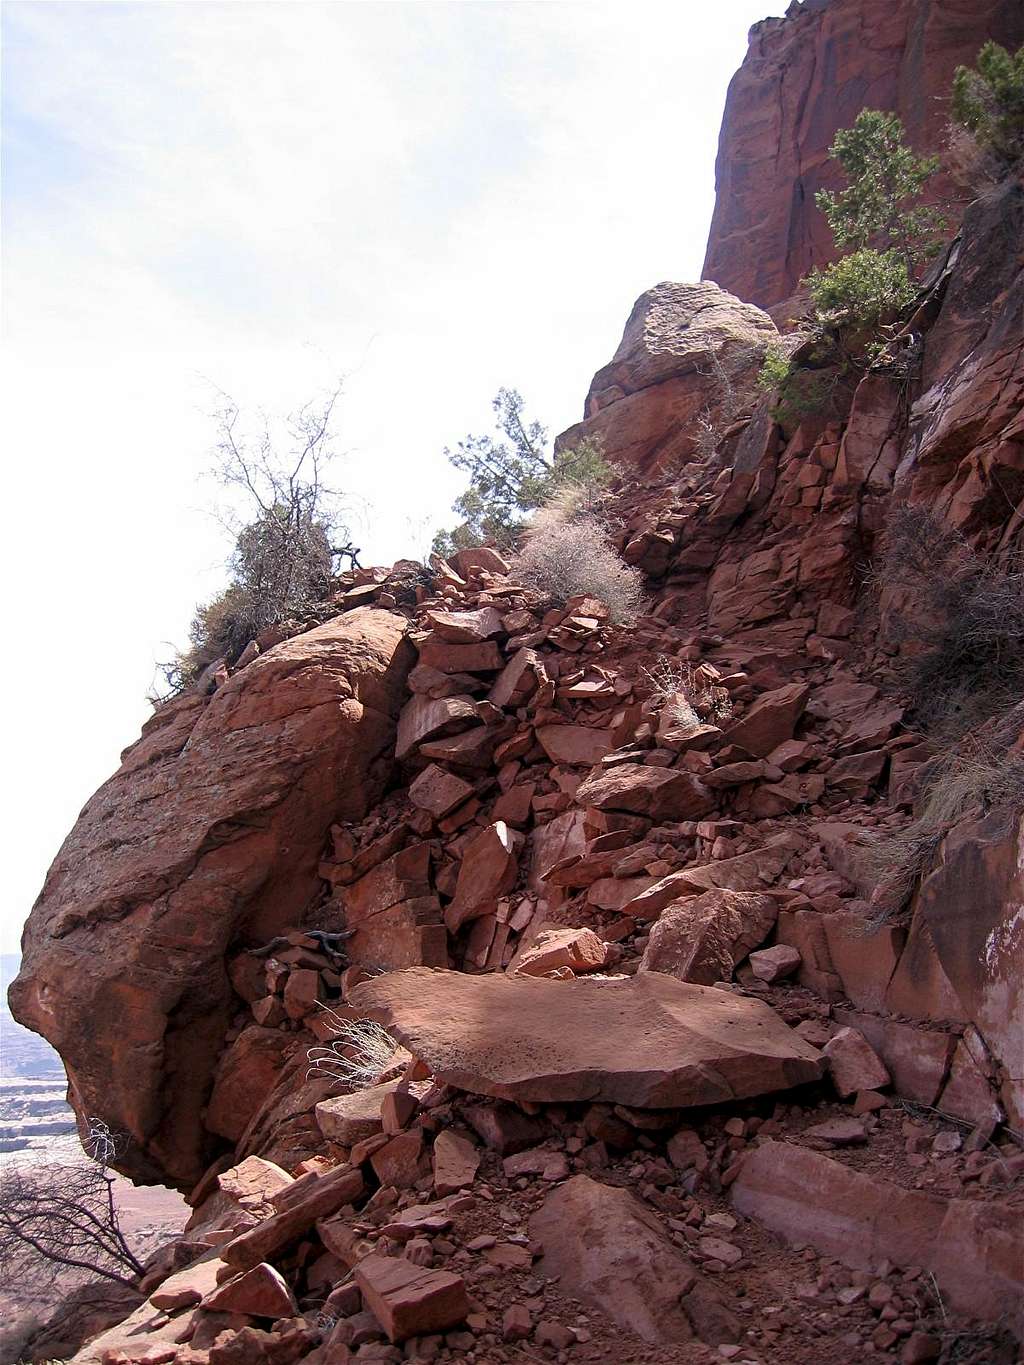 The Upper Parts of the Trail